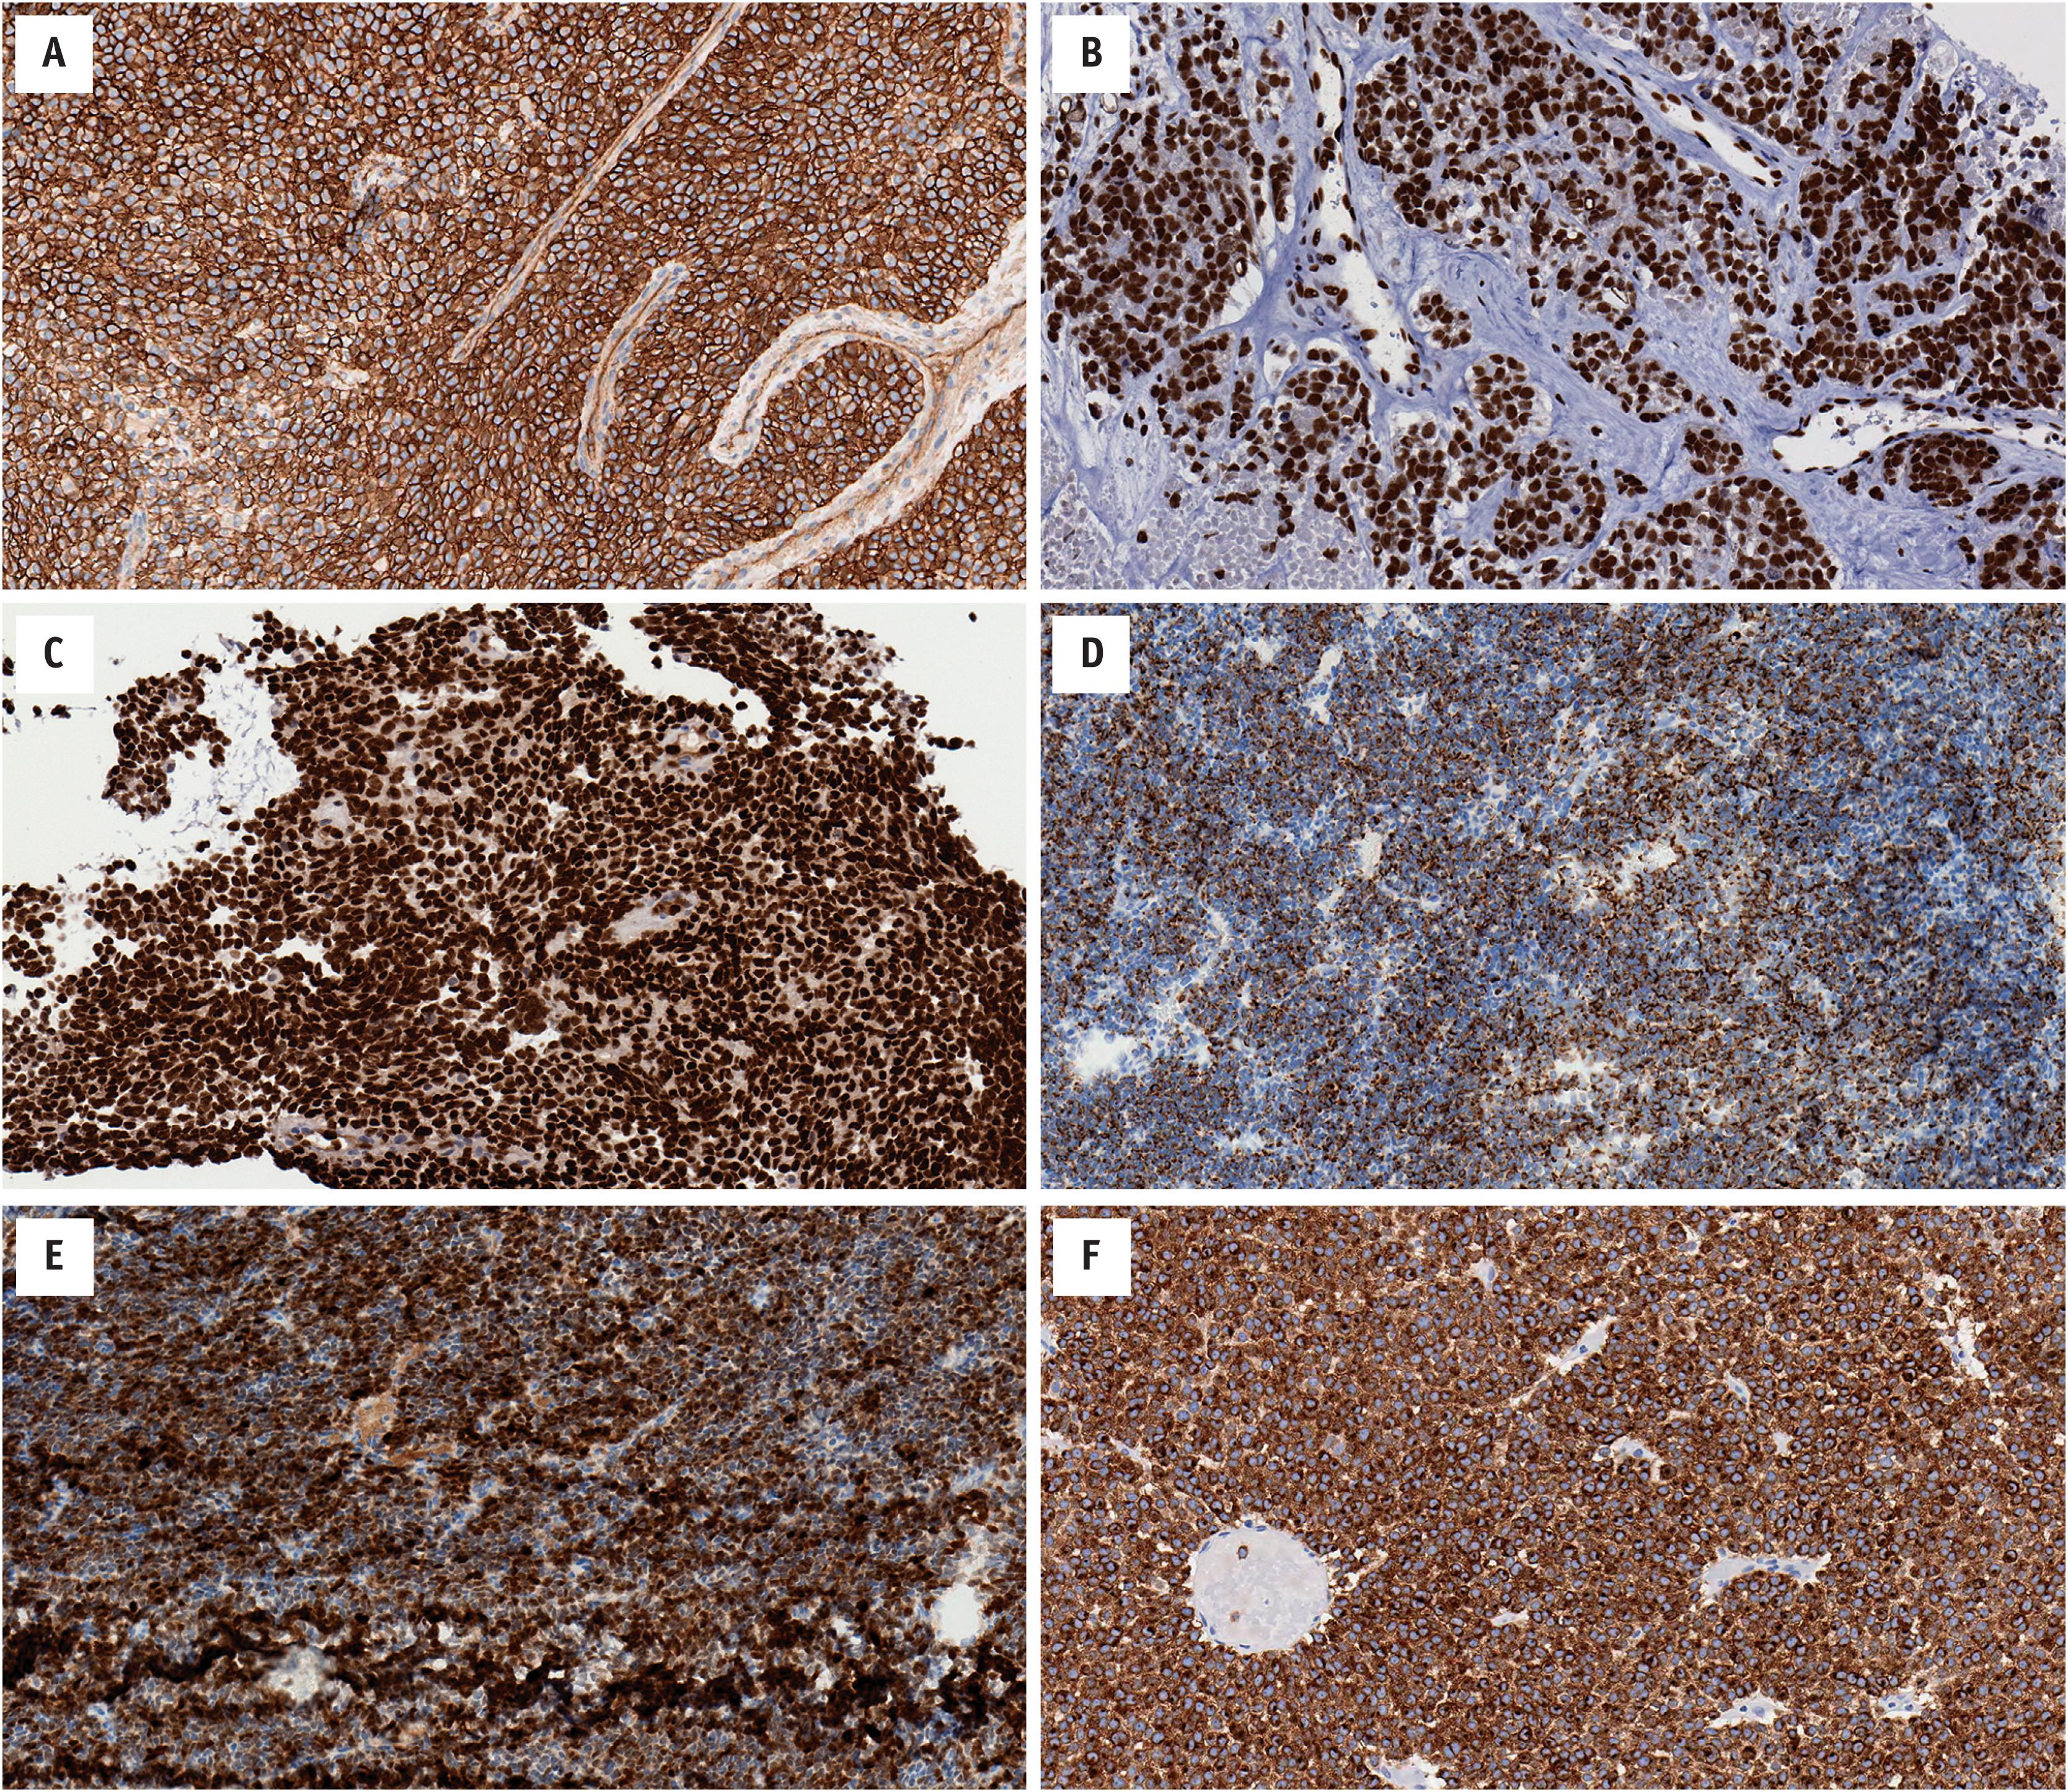 Fig. 14.4, The role of immunohistochemistry is typically limited, and non-specific, in Ewing Family Tumors. (A) These neoplasms typically express CD99 with a membranous pattern (same case as 17-2). (B) Tumors with FLI1 fusion partners express FLI1 ( EWSR1-FLI1 fusion gene). (C) Tumors with ERG fusion partners express ERG ( FUS-ERG fusion gene). Occasionally tumors may contain diffuse expression of other markers, such as (D) keratin ( EWSR1-FLI1 fusion gene), ( E ) S100 (same case as “D”), and (F) synaptophysin ( EWSR1-FEV fusion gene).